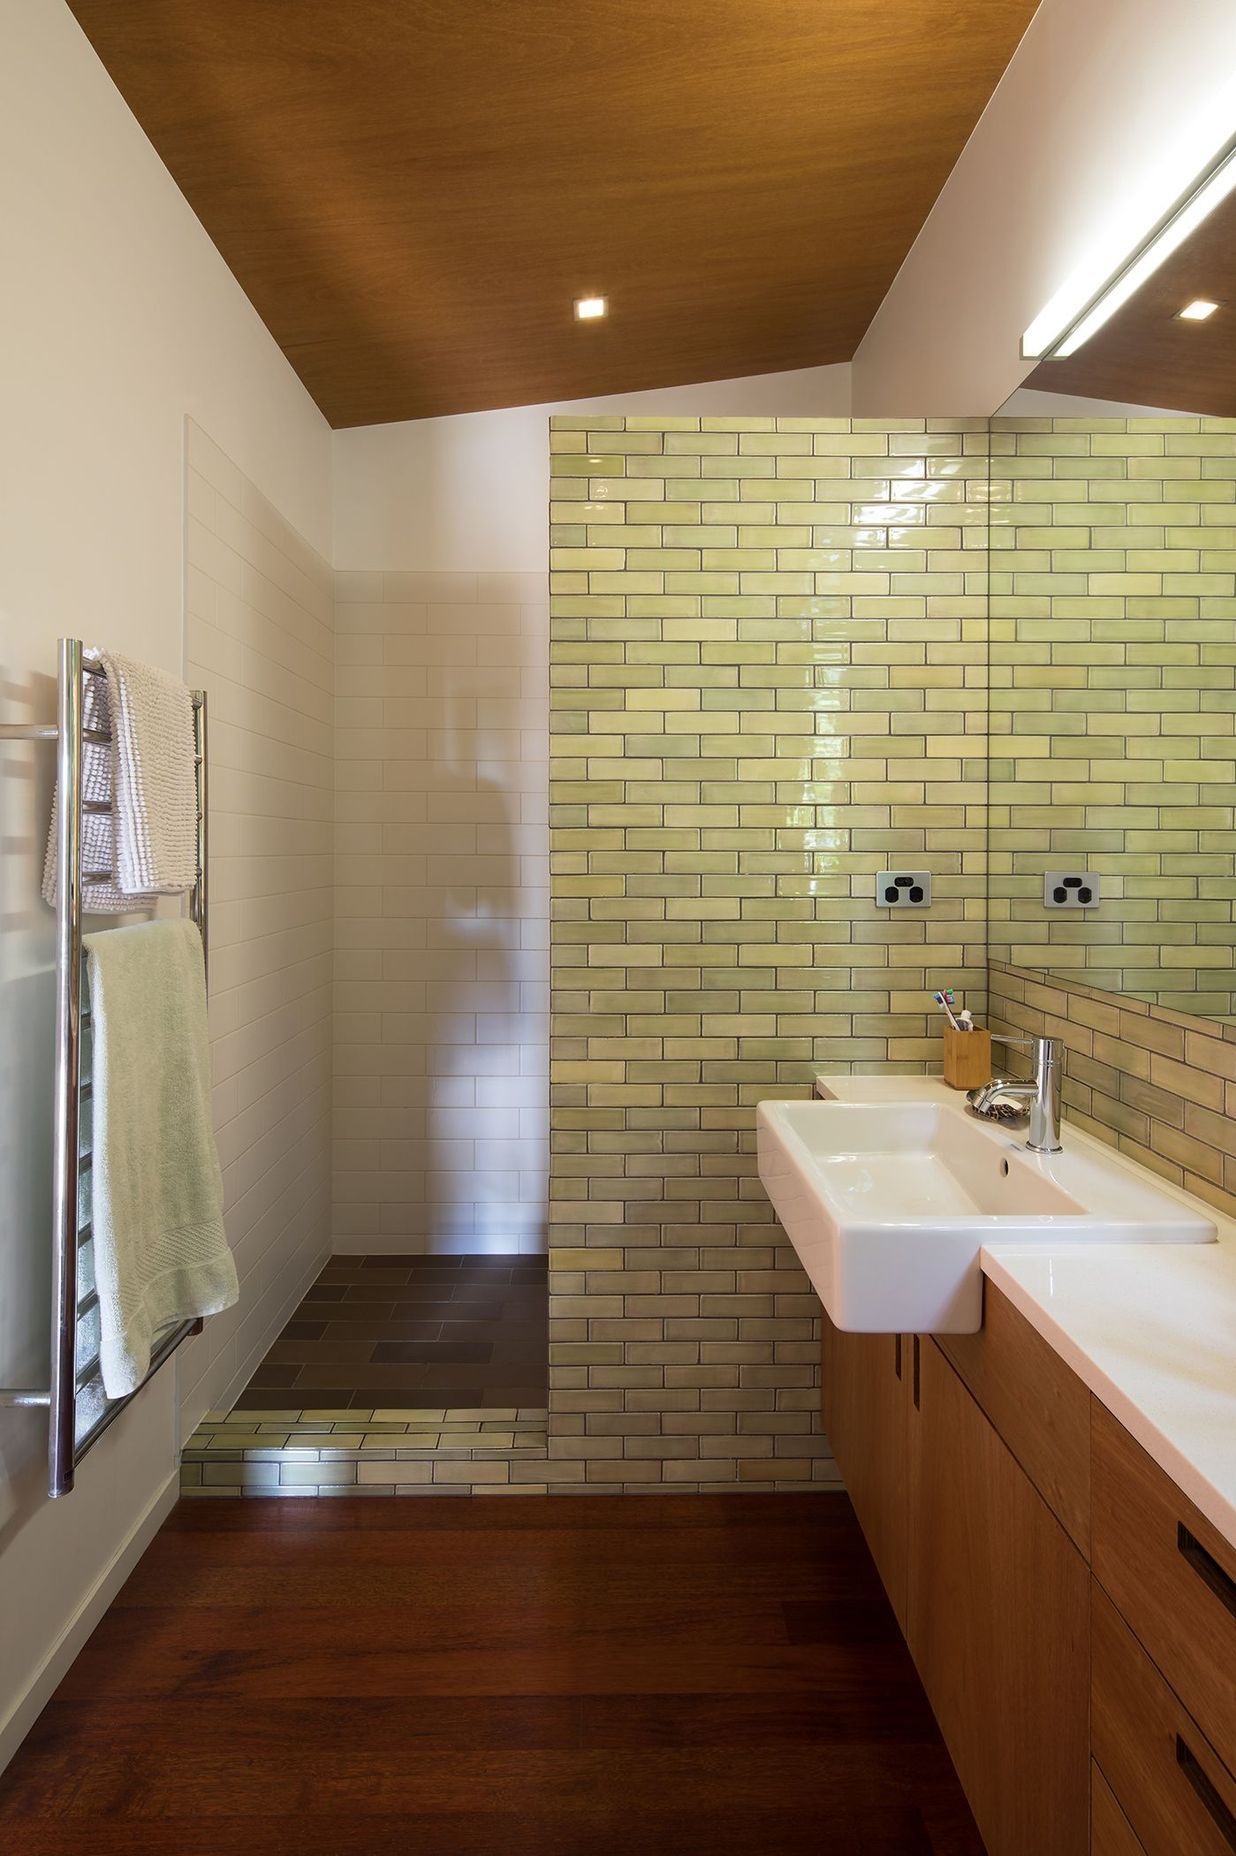 The shower is semi-enclosed behind an olive-green subway tiled wall.